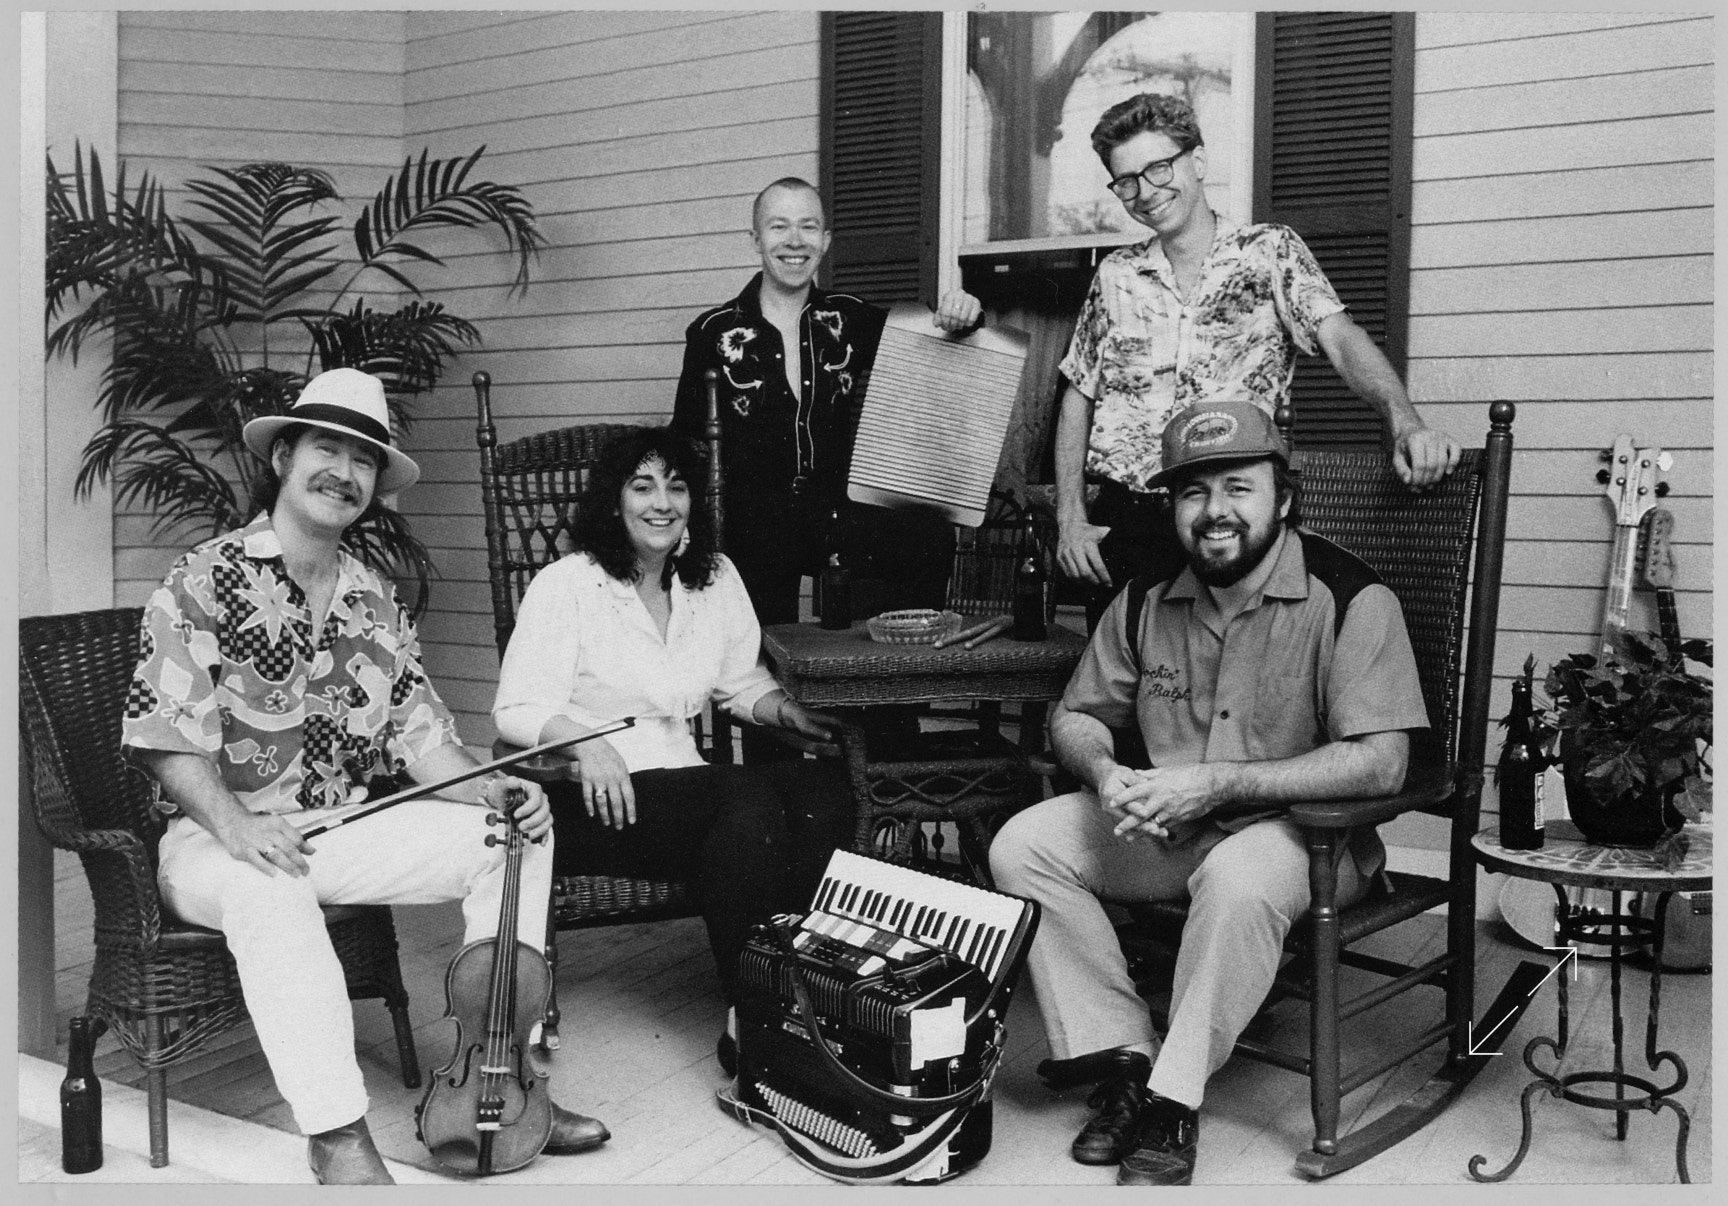 A photo from the album cover of the Boogaloo Swamis band. Ryan Thomson - fiddle, Jeanne Boyer - bass, Micky Bones - percussion, Pete Weatherby - guitar, Ralph Tufo - accordion